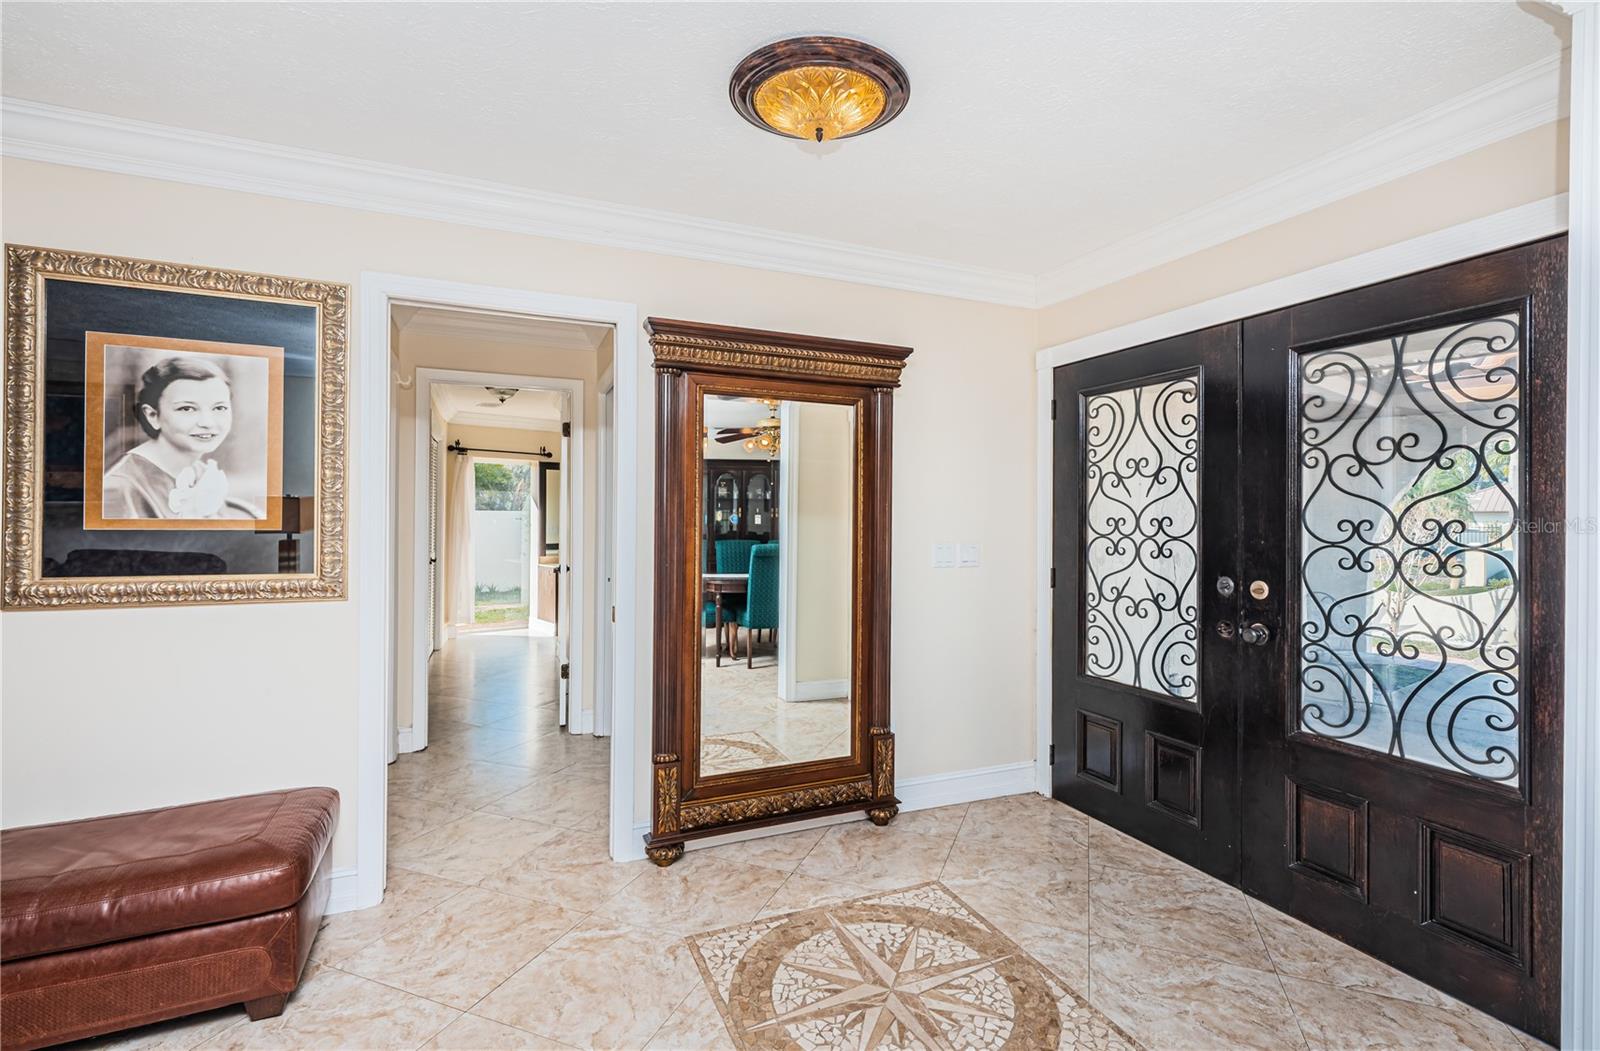 Foyer features Italian marble mosaic in the floor.